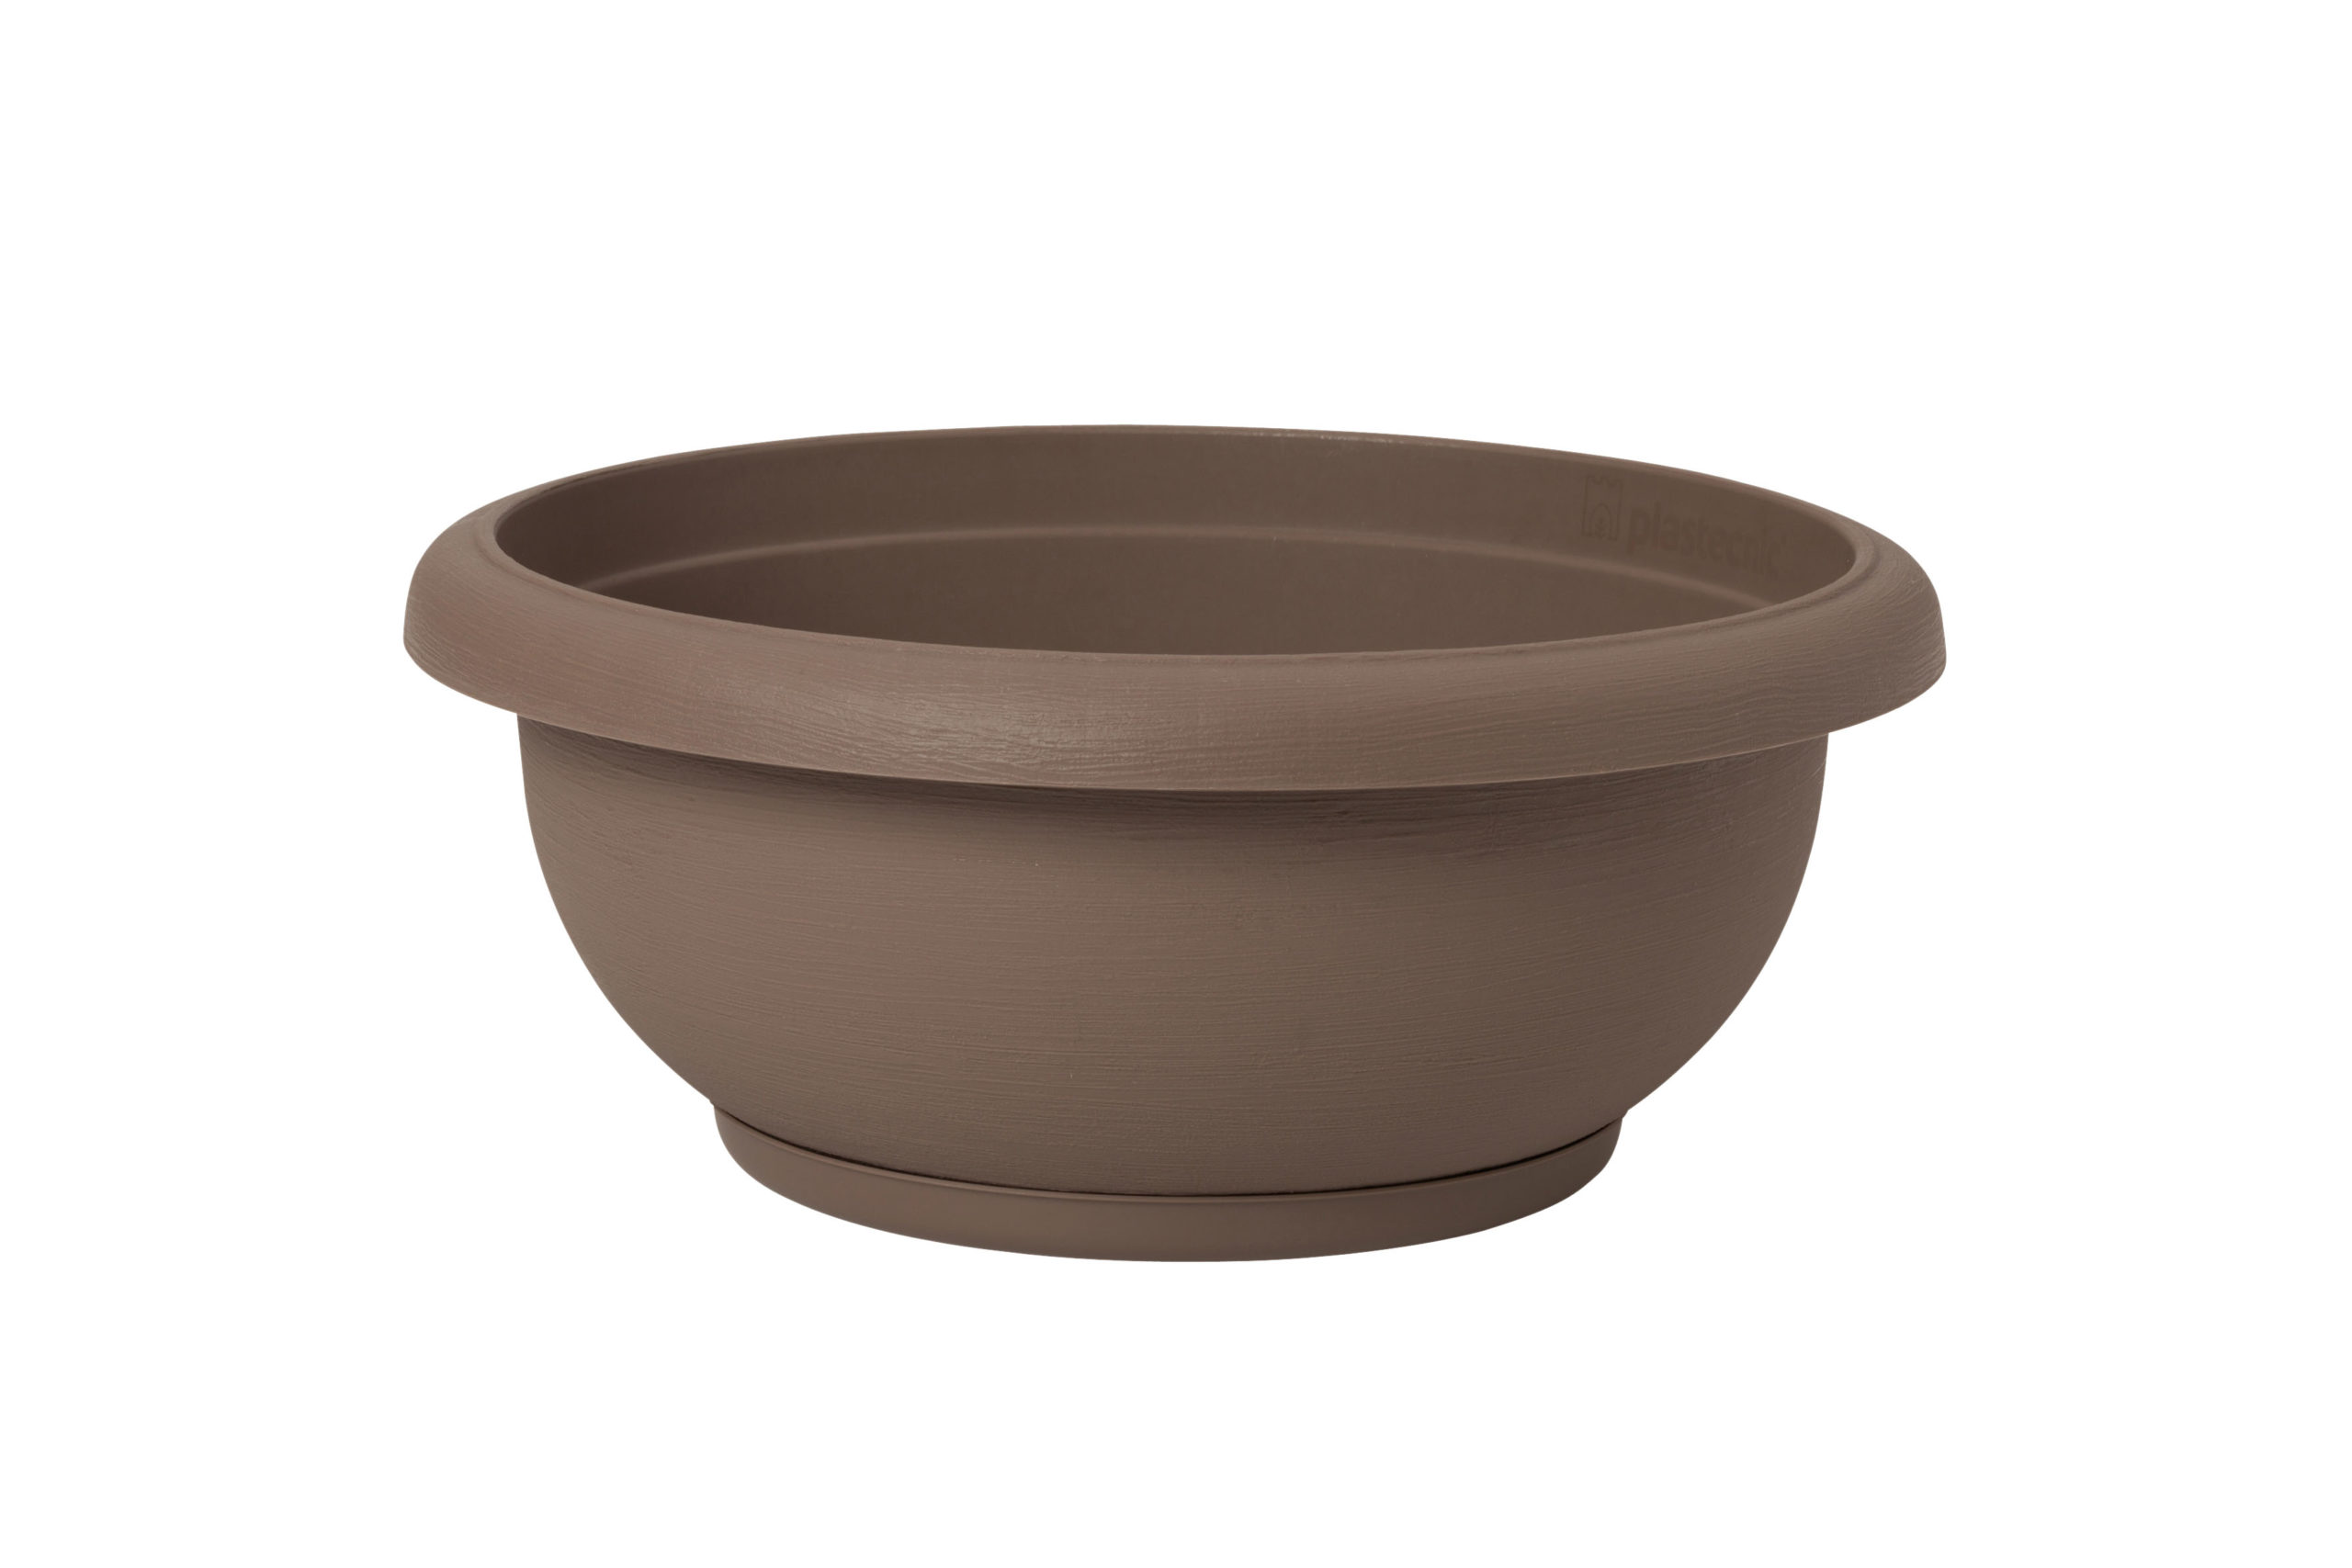 ROUND POT Treadstone SAUCER Products 